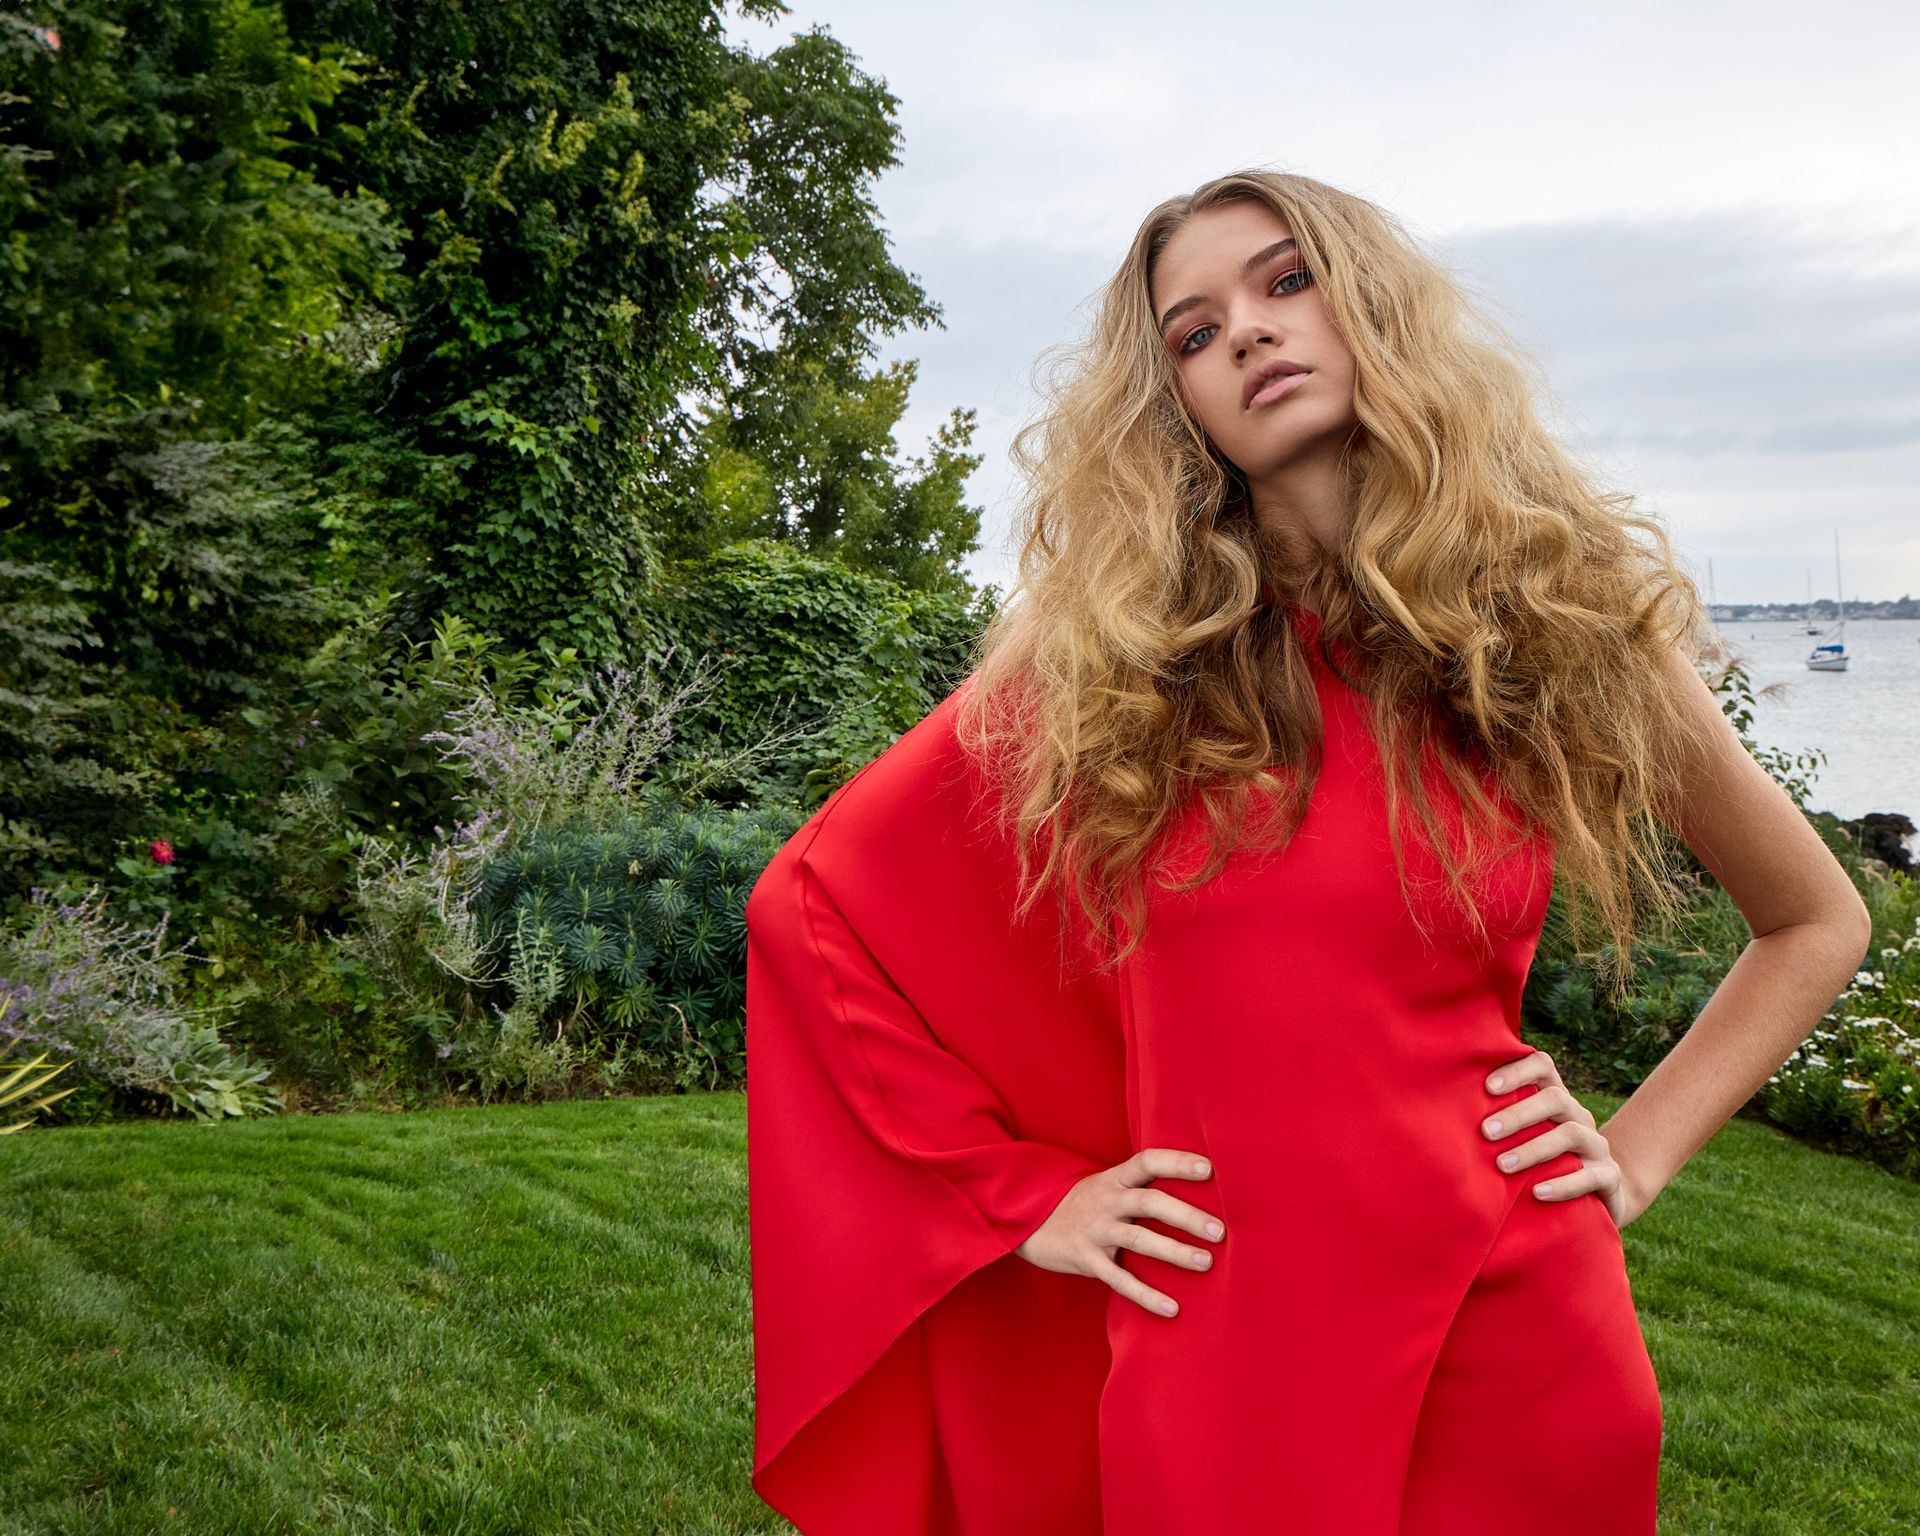 International vogue model in a red dress is standing in the grass with her hands on her hips.